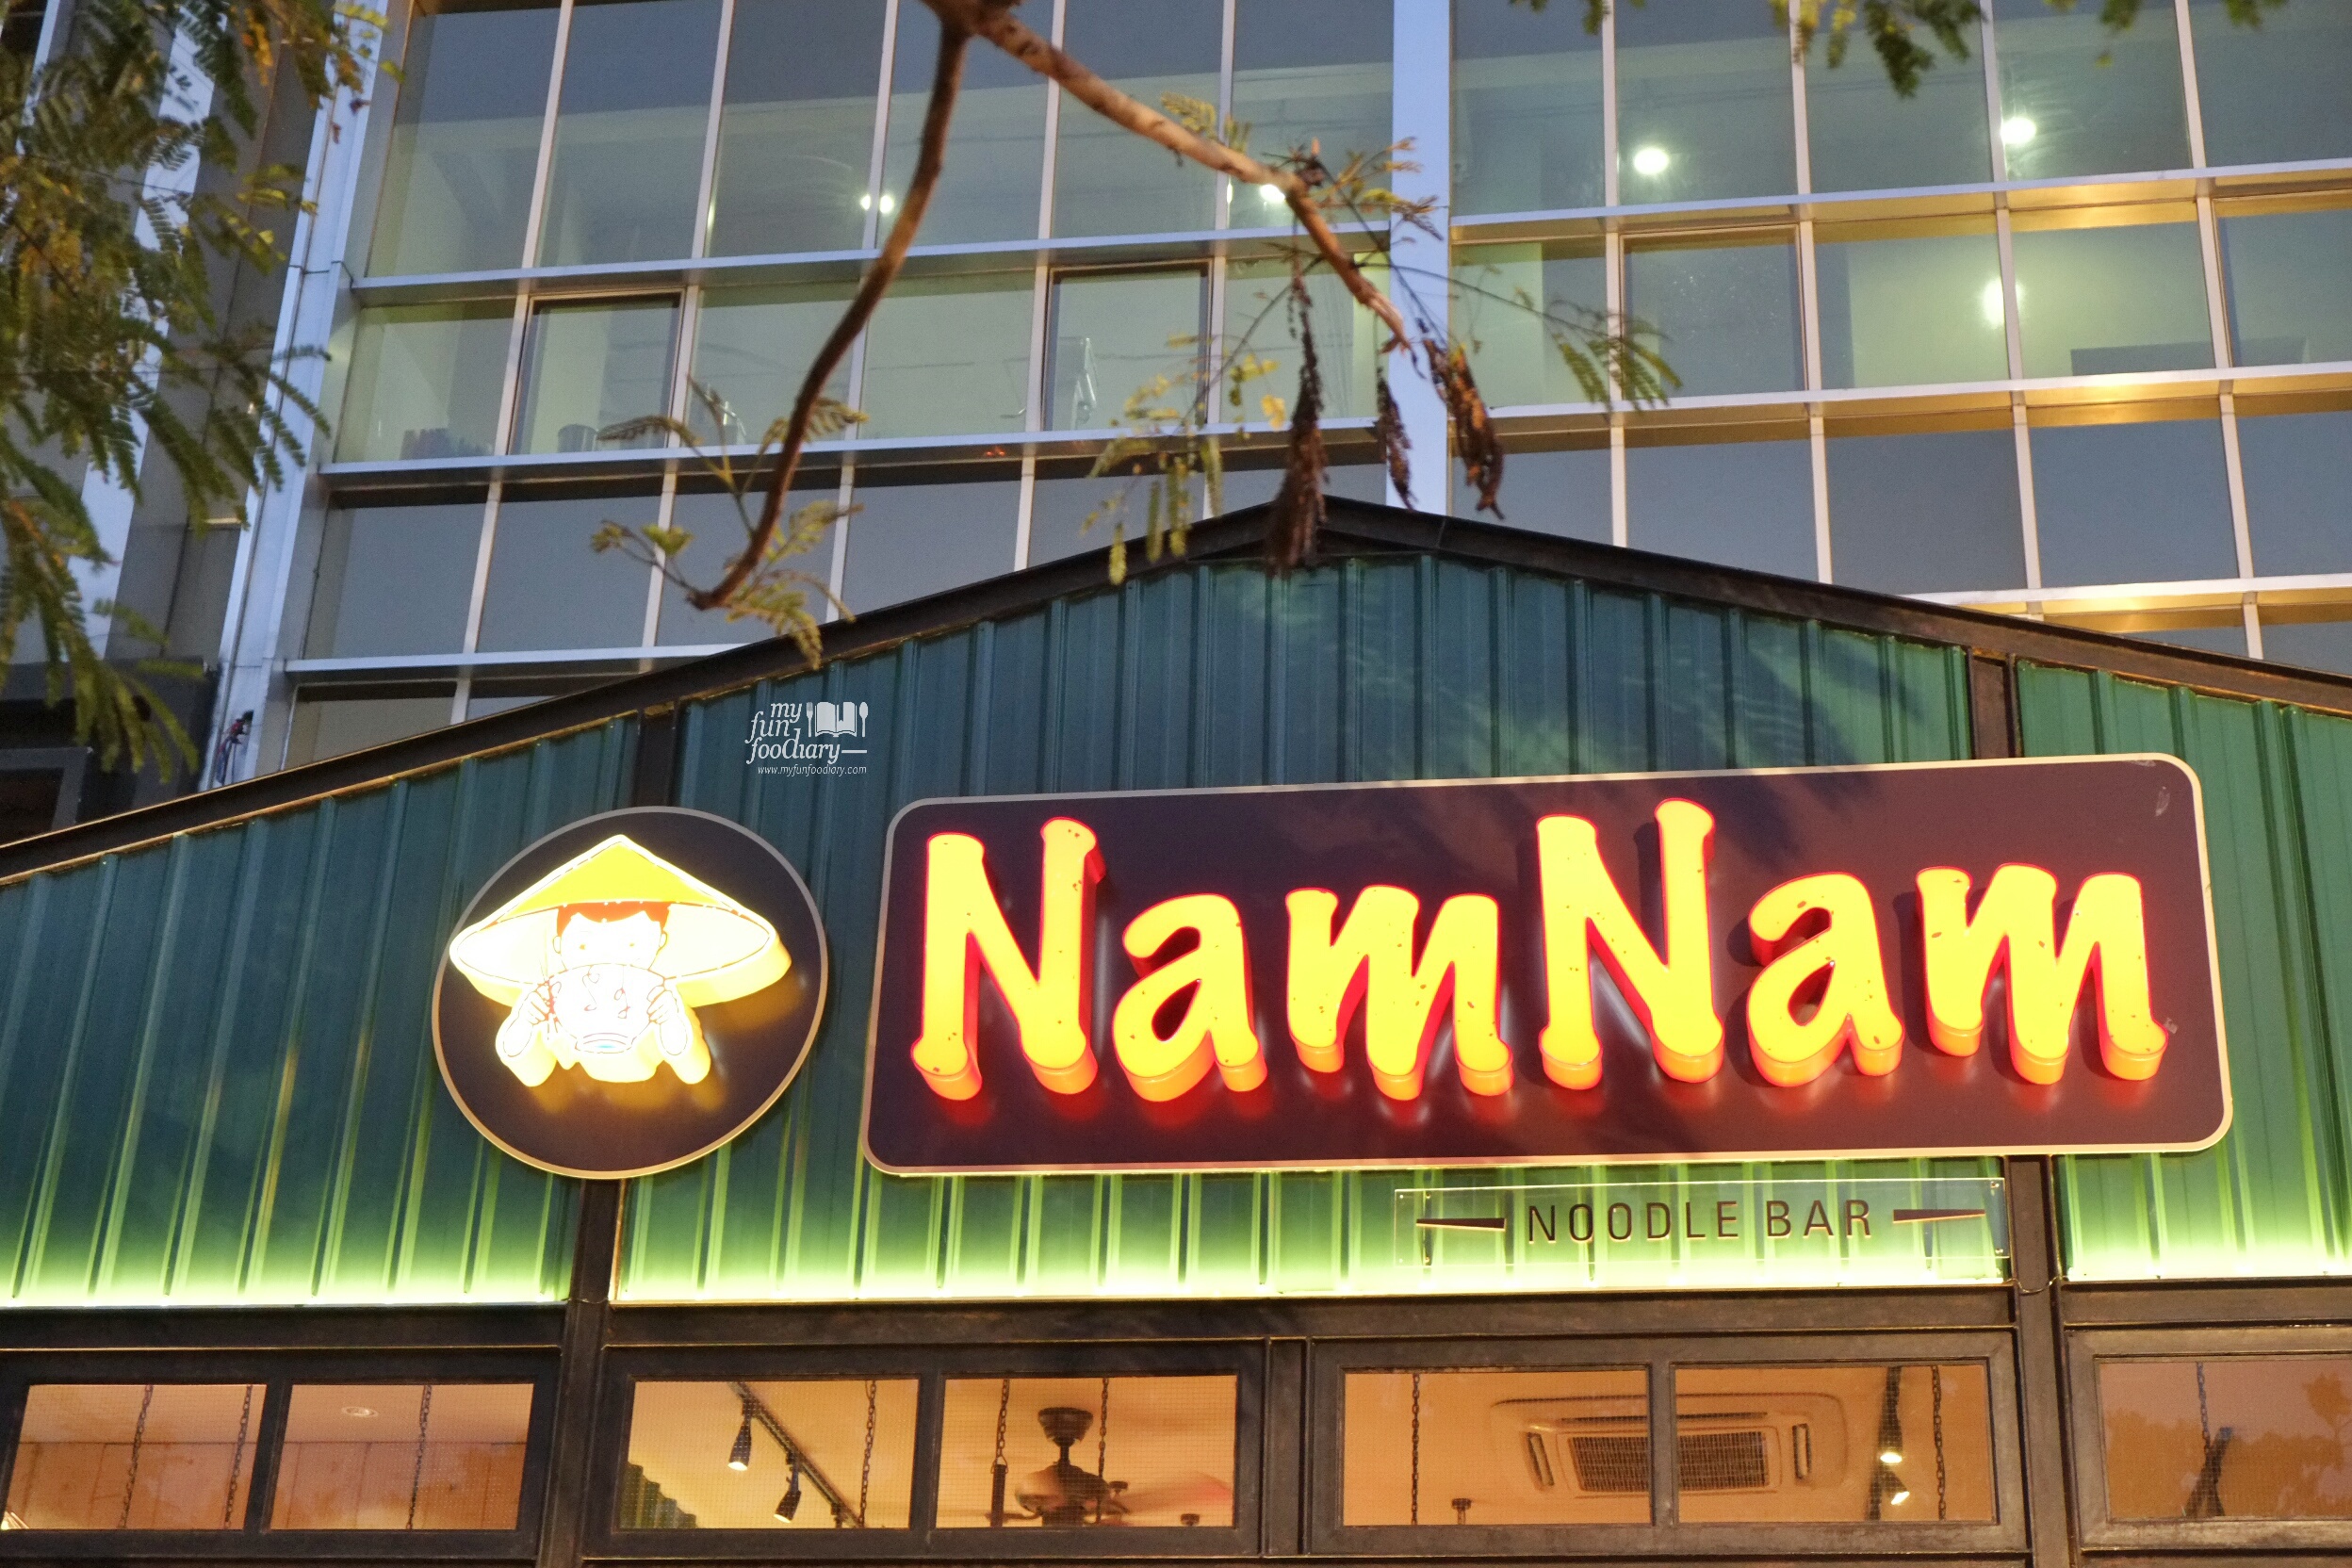 Signboard Nam Nam Noodle Bar by Myfunfoodiary